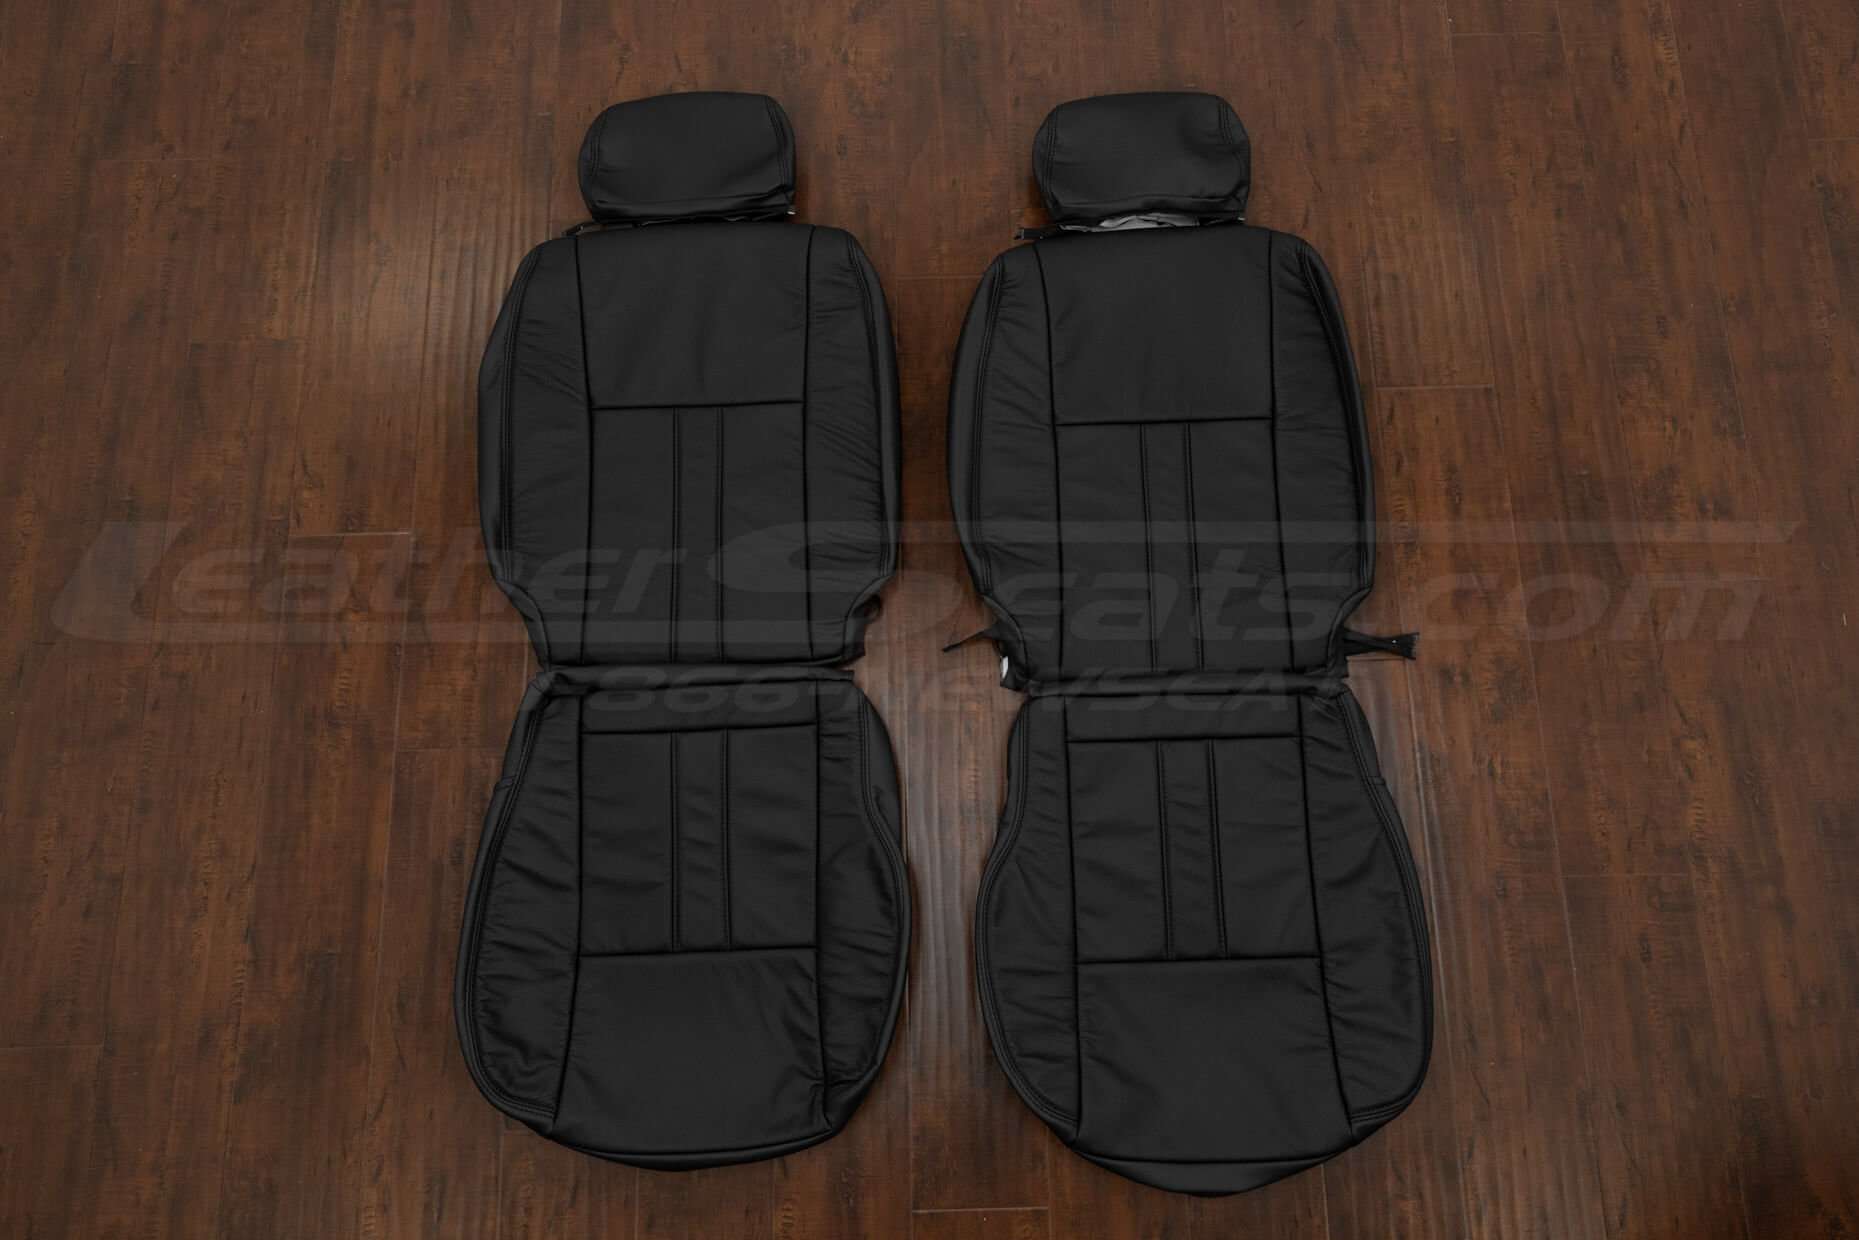 2002-2004 Nissan Xterra Leather Seat Interior Kit - Black - Front seat upholstery